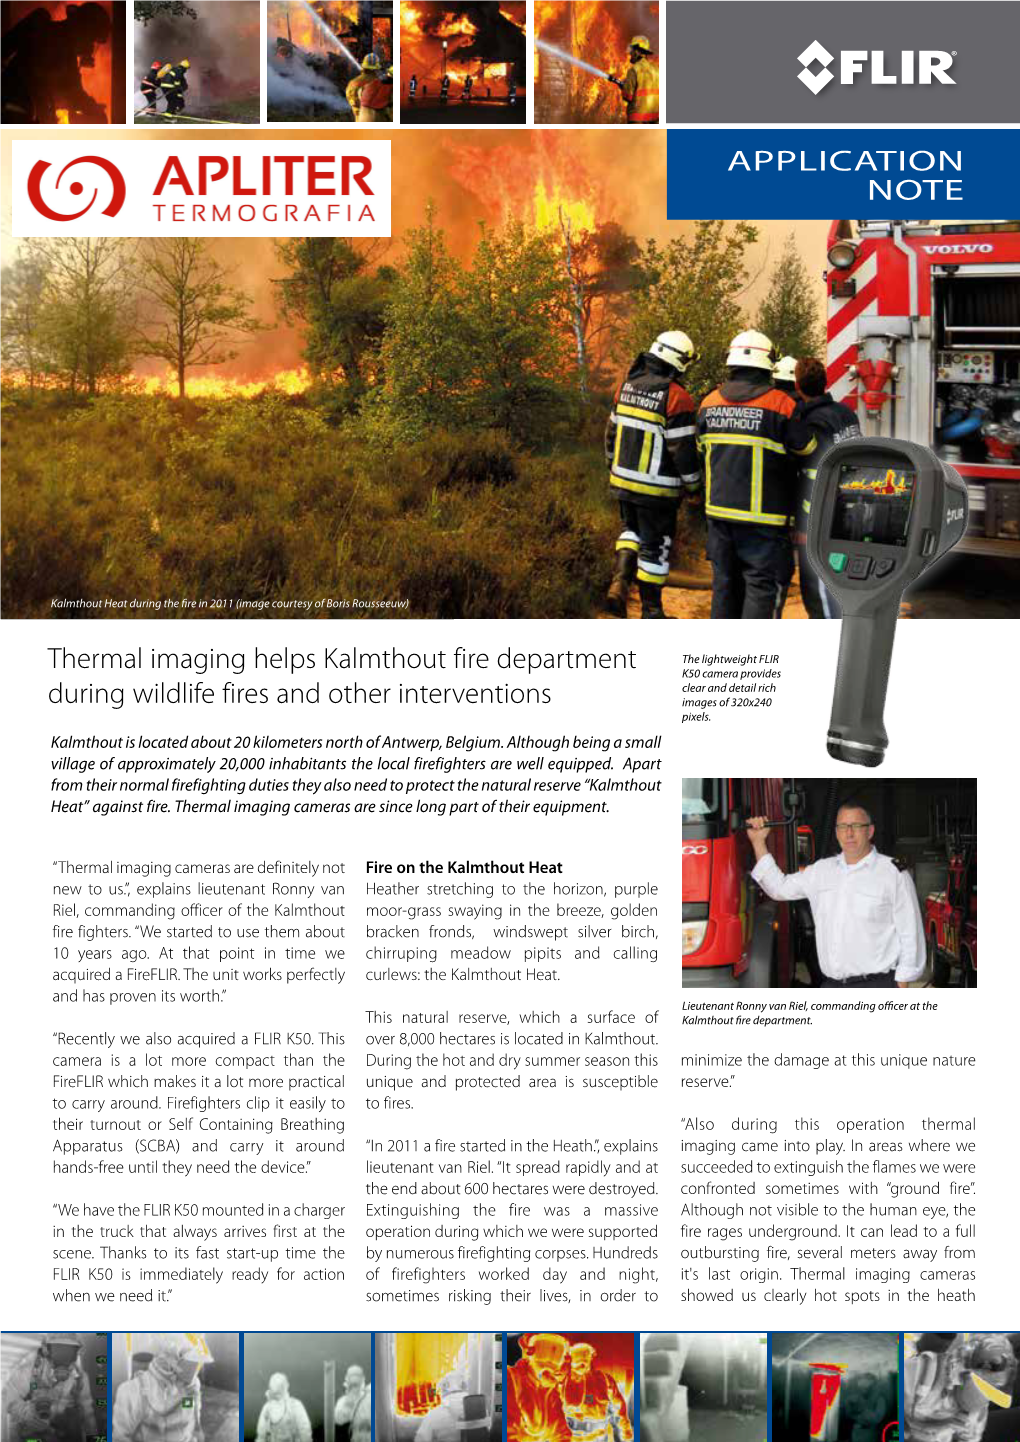 APPLICATION NOTE Thermal Imaging Helps Kalmthout Fire Department During Wildlife Fires and Other Interventions